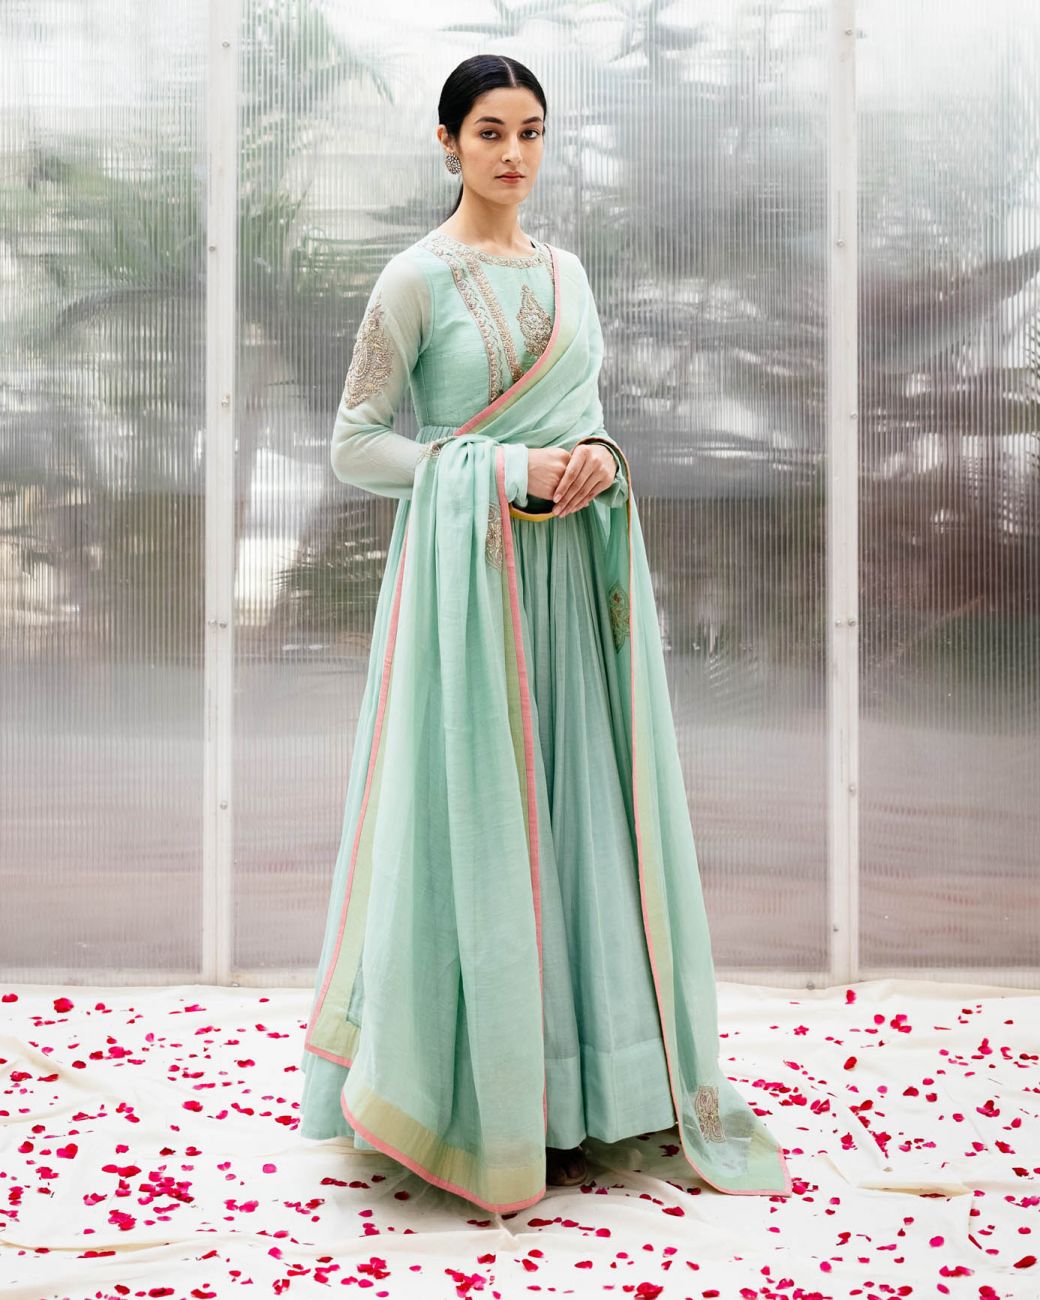 Mint Chanderi Embroidered Anarkali - Indian Clothing in Denver, CO, Aurora, CO, Boulder, CO, Fort Collins, CO, Colorado Springs, CO, Parker, CO, Highlands Ranch, CO, Cherry Creek, CO, Centennial, CO, and Longmont, CO. Nationwide shipping USA - India Fashion X